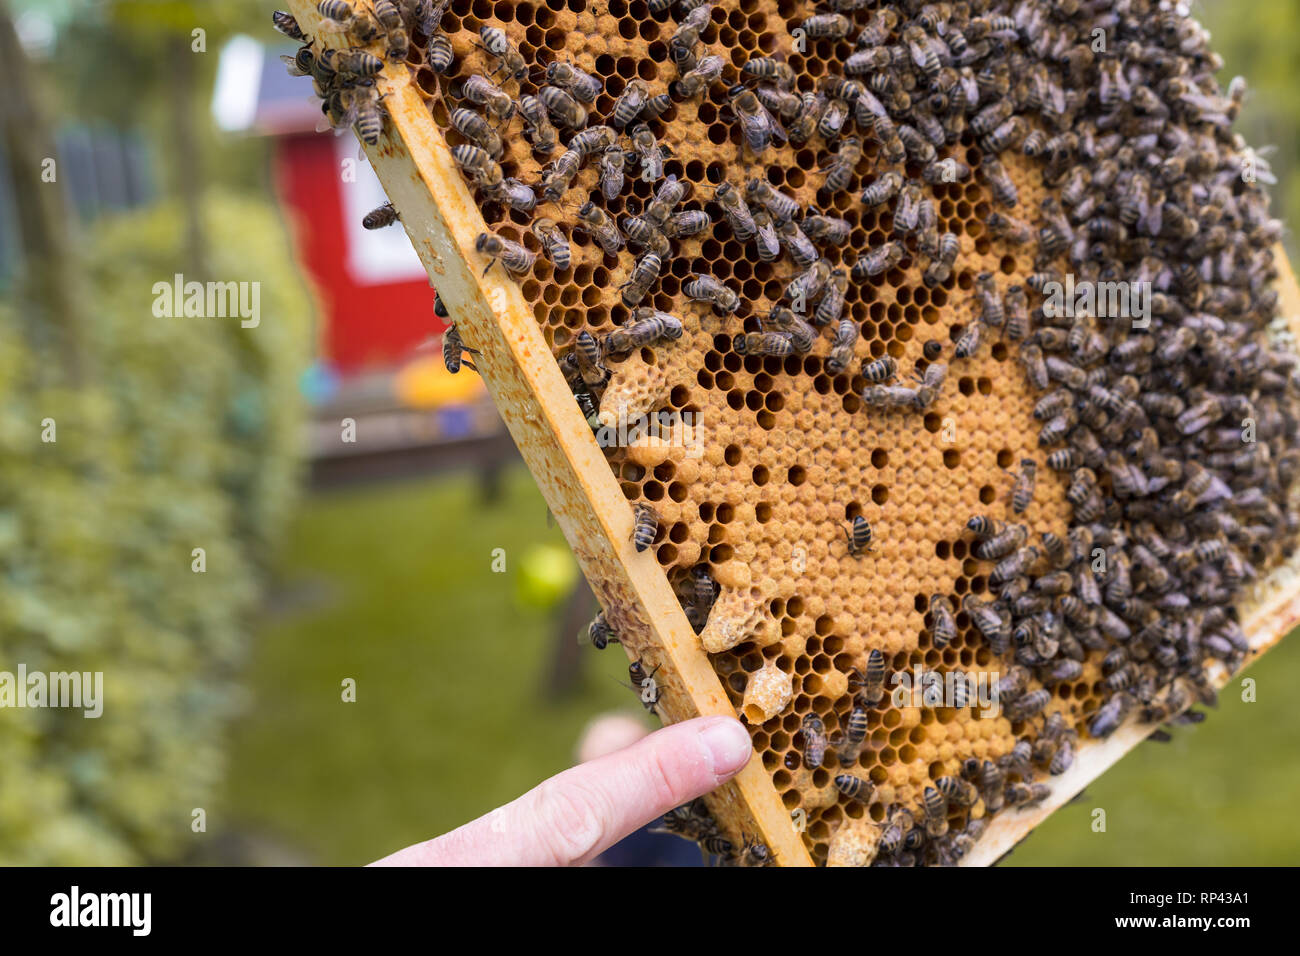 Beekeeper checks a frame of a hive. It shows open and closed cells of a breeding honeycomb and creeping bees. The finger points to an open queen cell Stock Photo